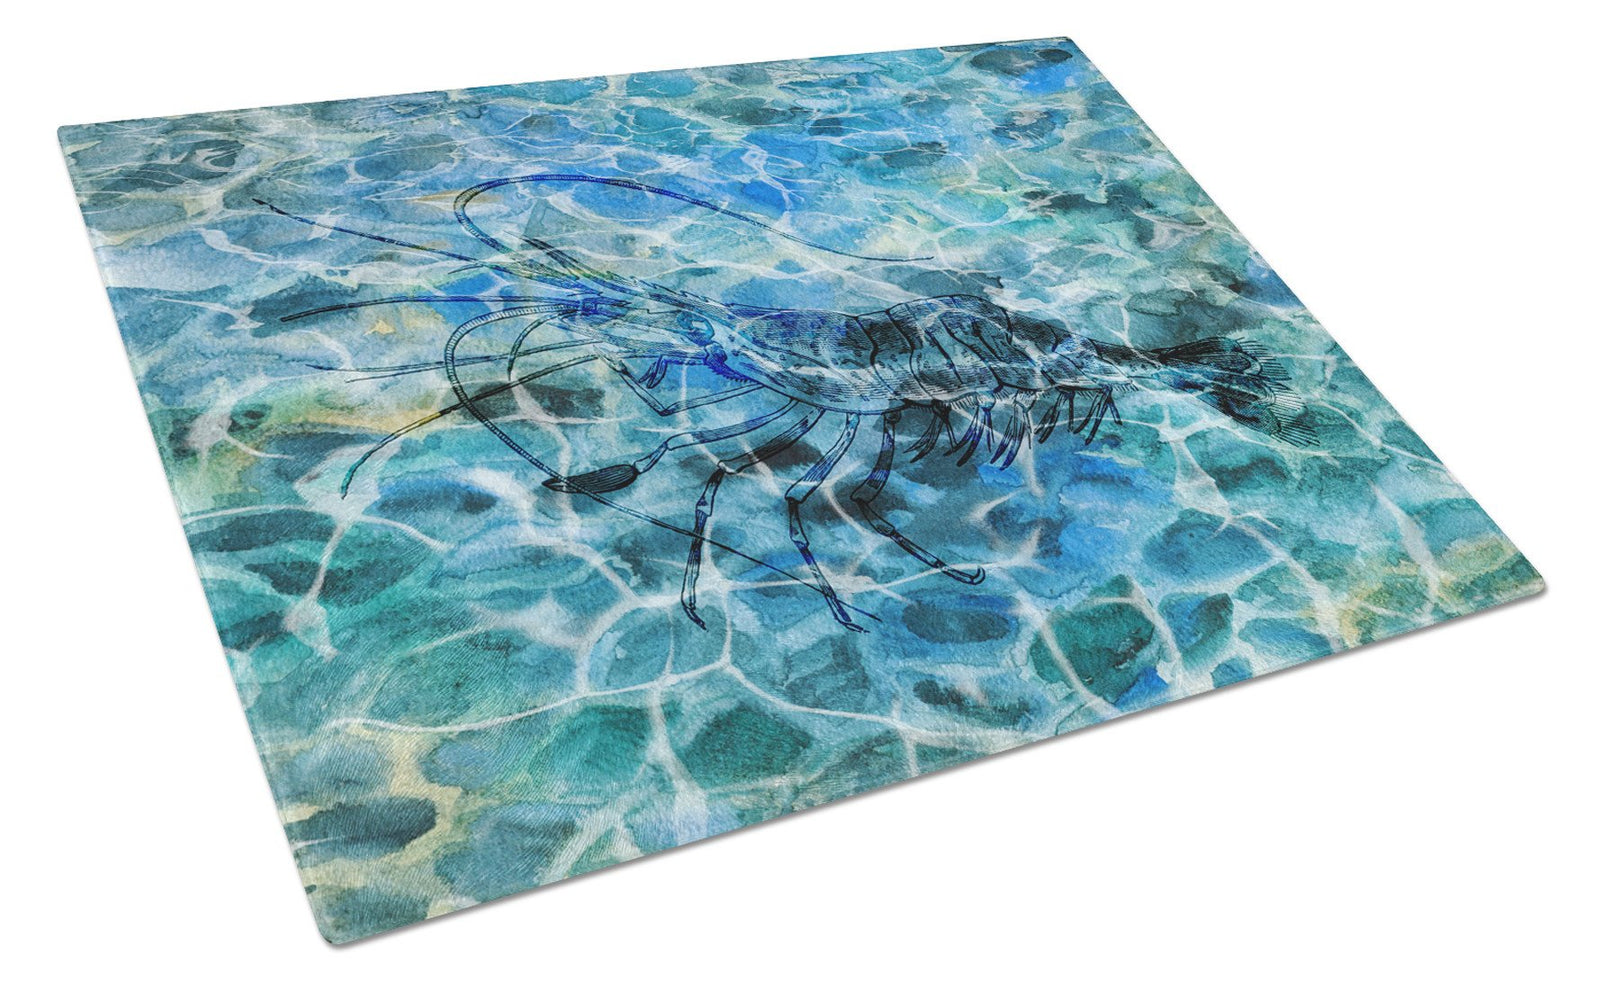 Shrimp Under water Glass Cutting Board Large BB5359LCB by Caroline's Treasures